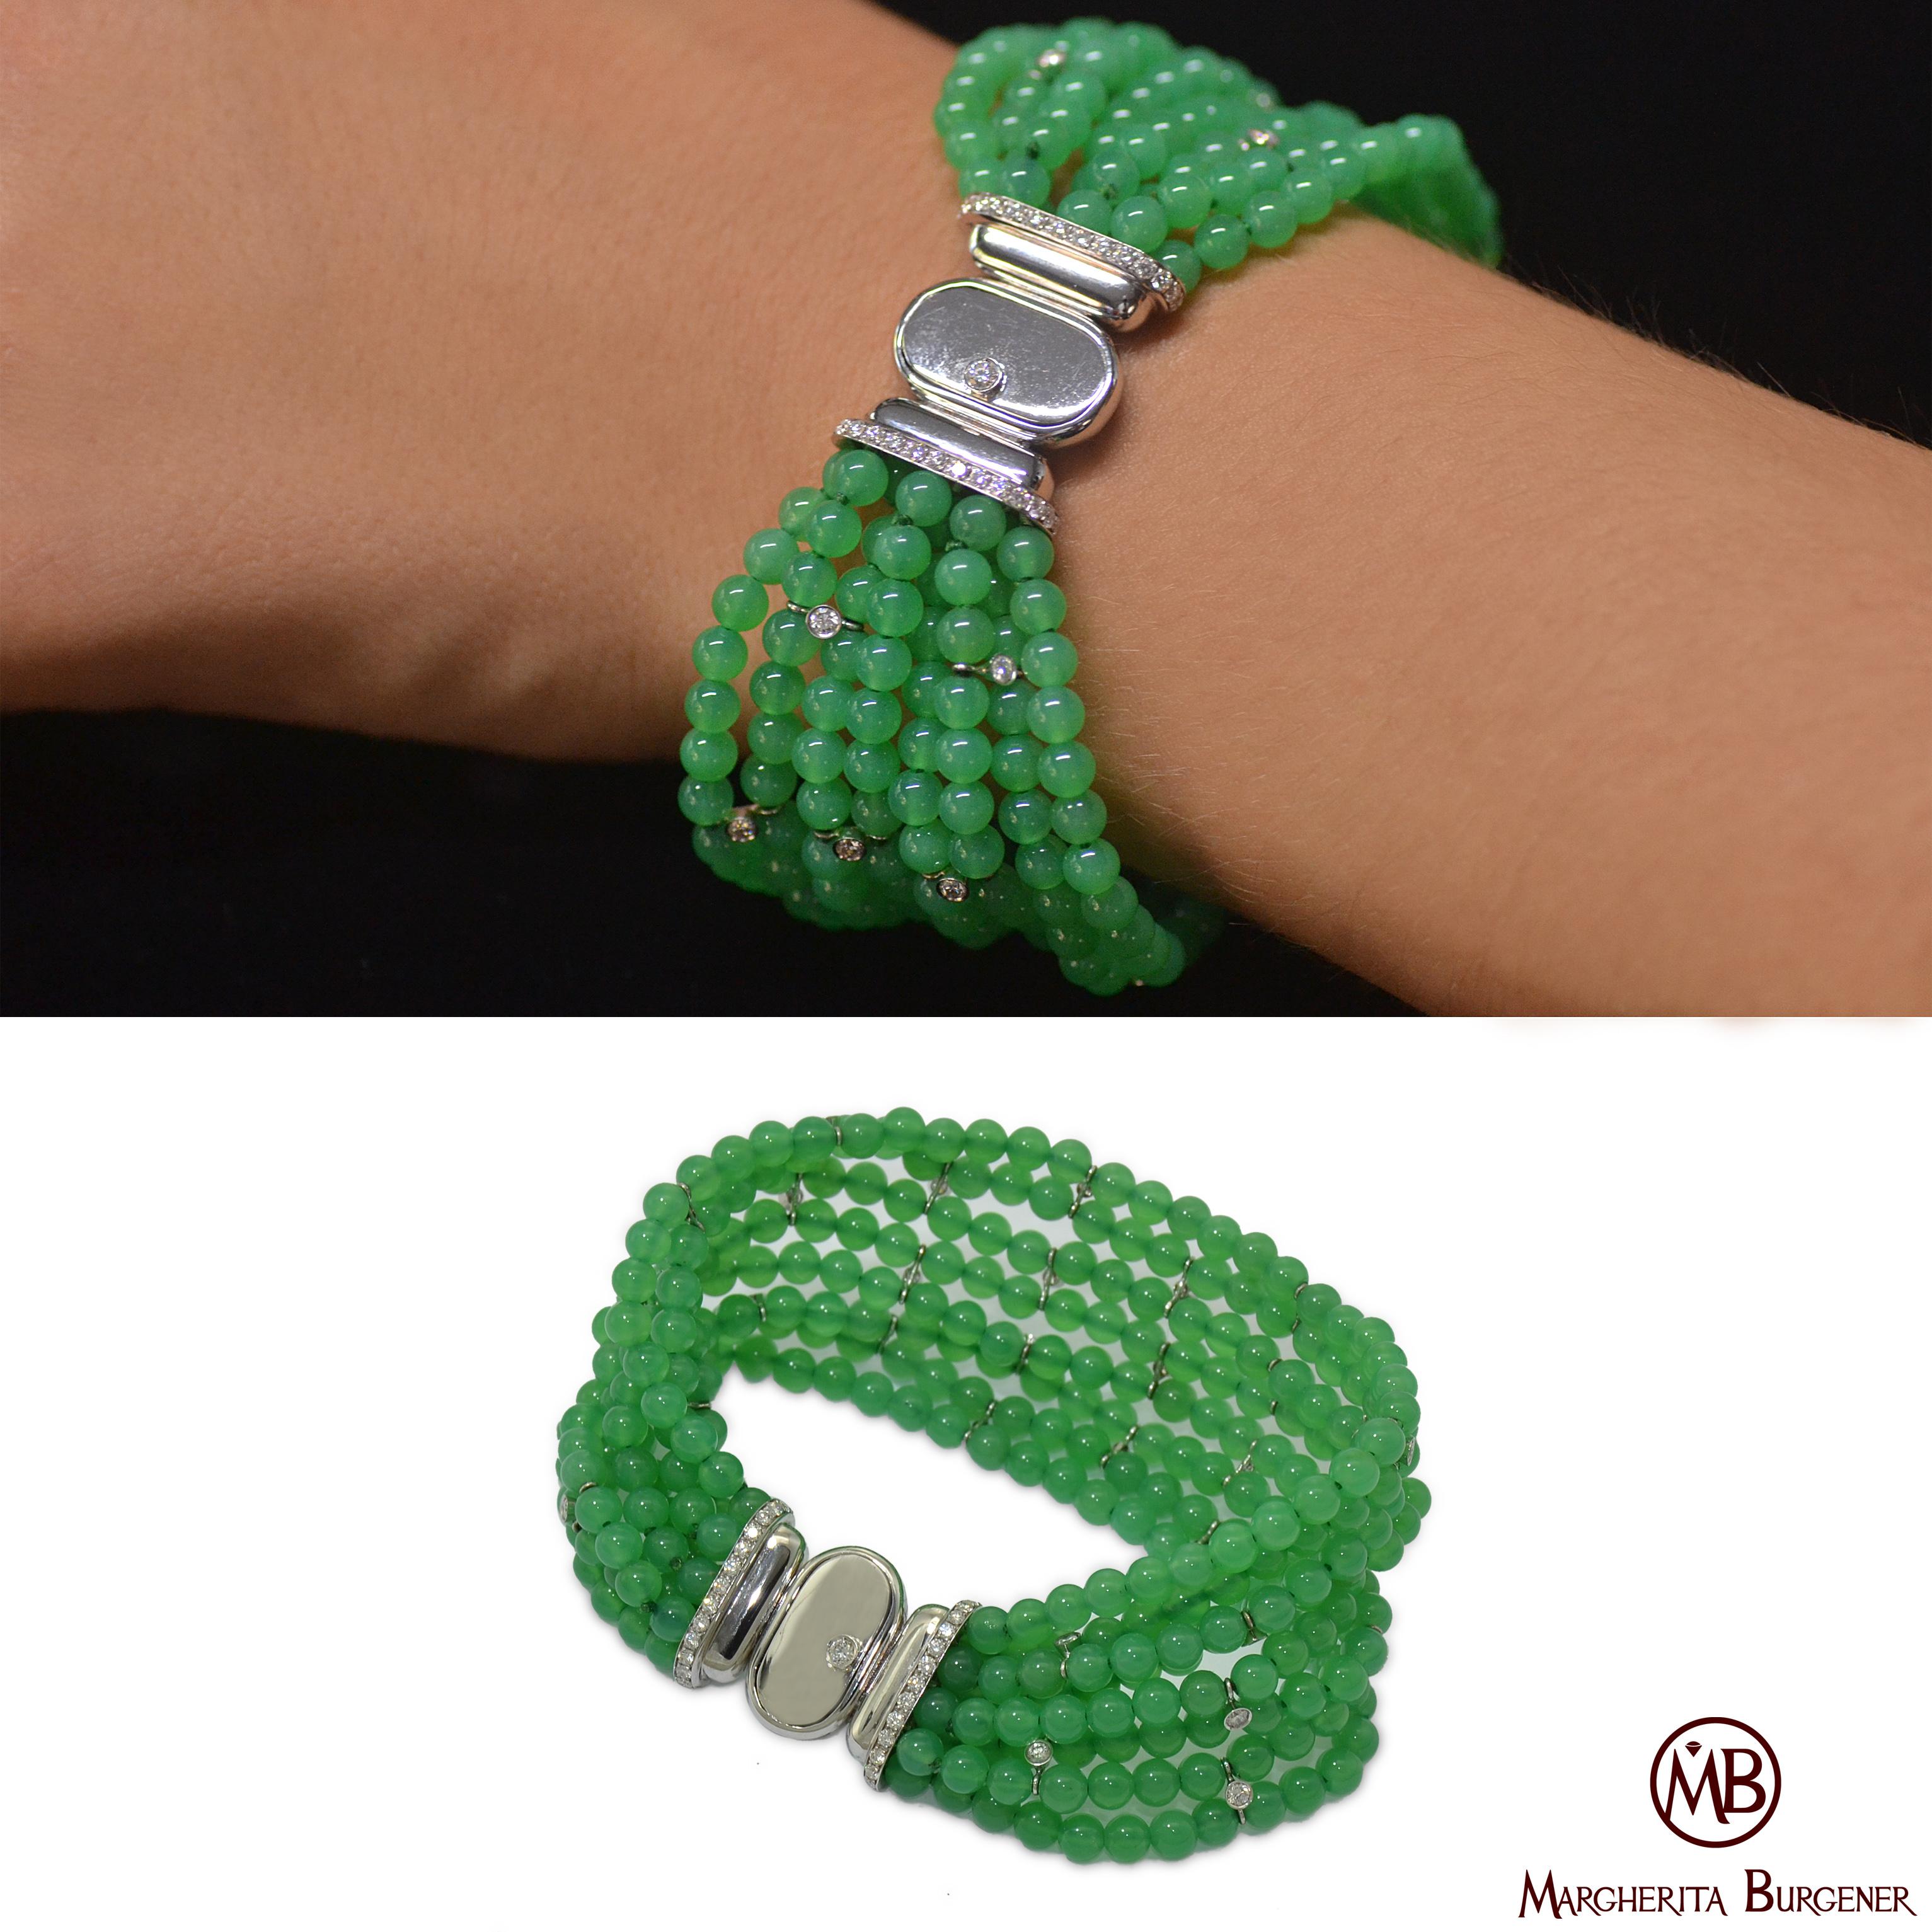 Flexible bracelet,  handcrafted in Margherita Burgener workshop, Italy.
Very chic and comfortable.
8 little balls strands of chrysoprase are highlighted by single diamonds, bezel set on white gold.

18 KT white gold g 11.40 
n. 67 diamond ct 1.30 